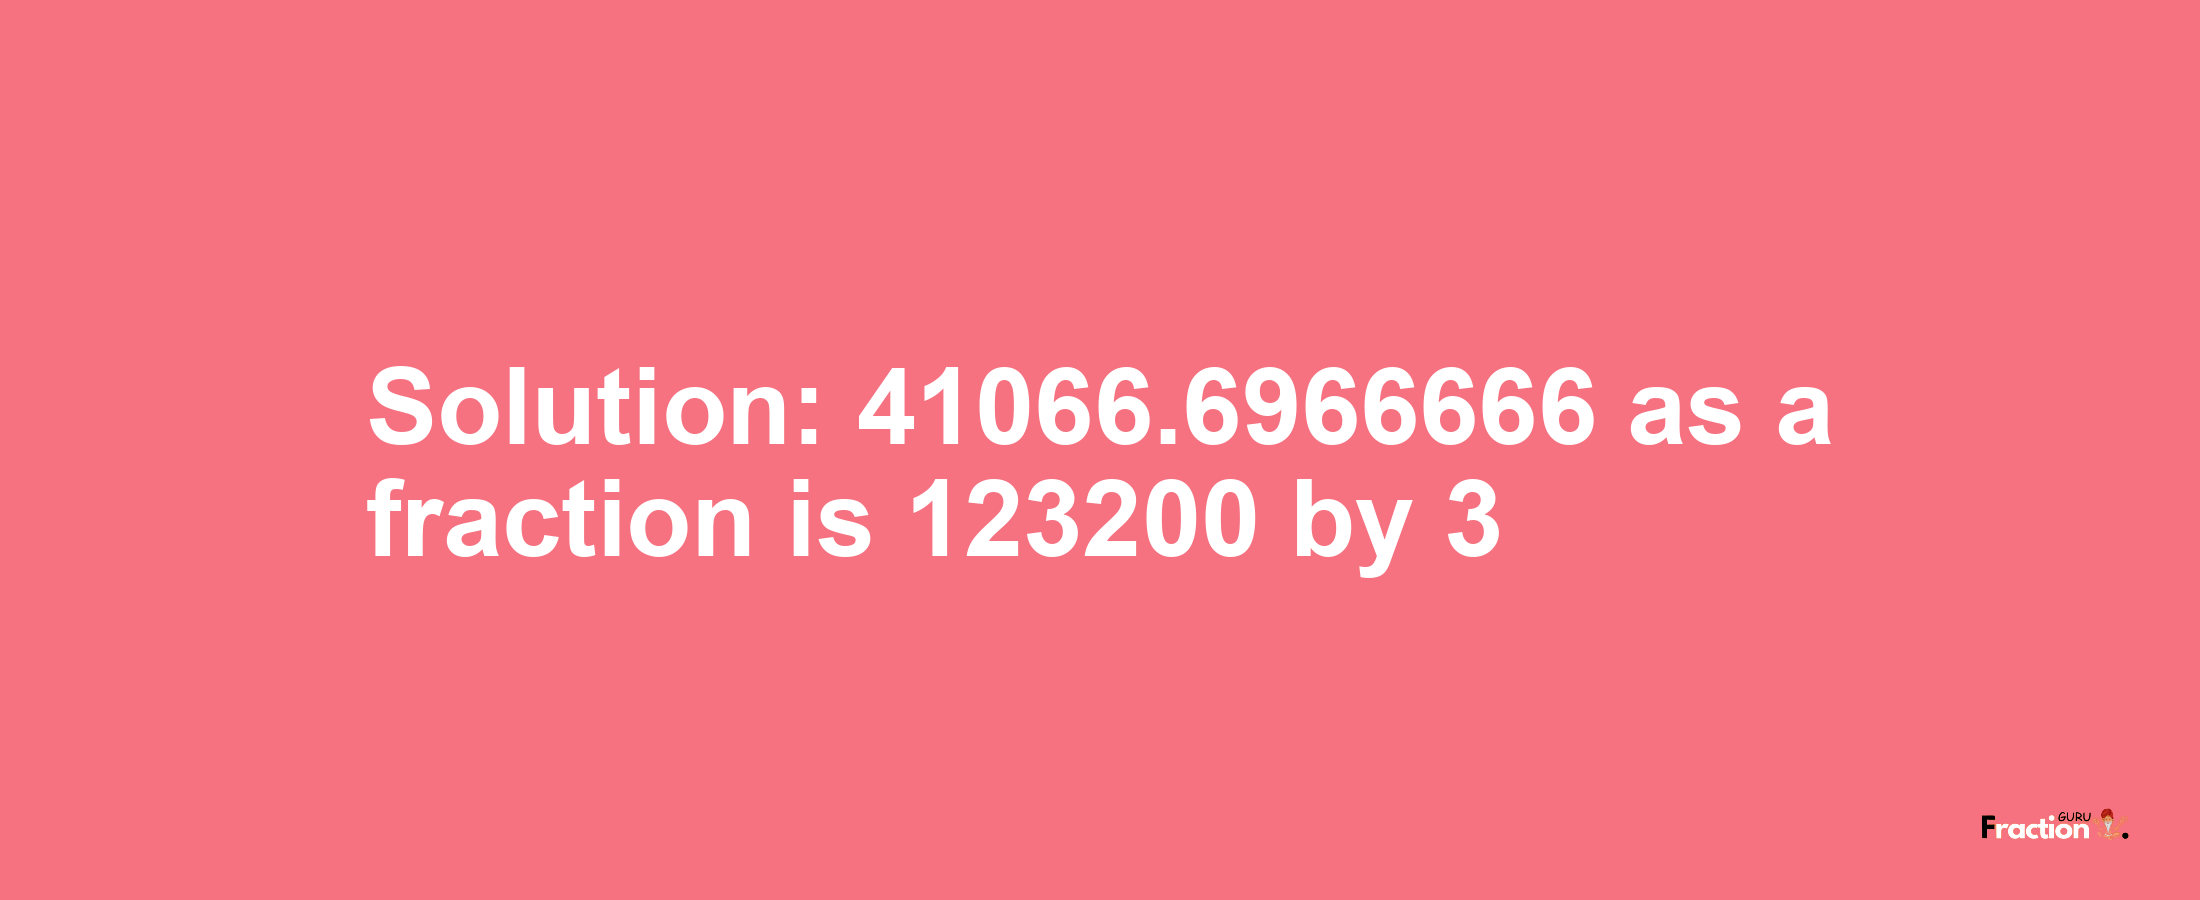 Solution:41066.6966666 as a fraction is 123200/3